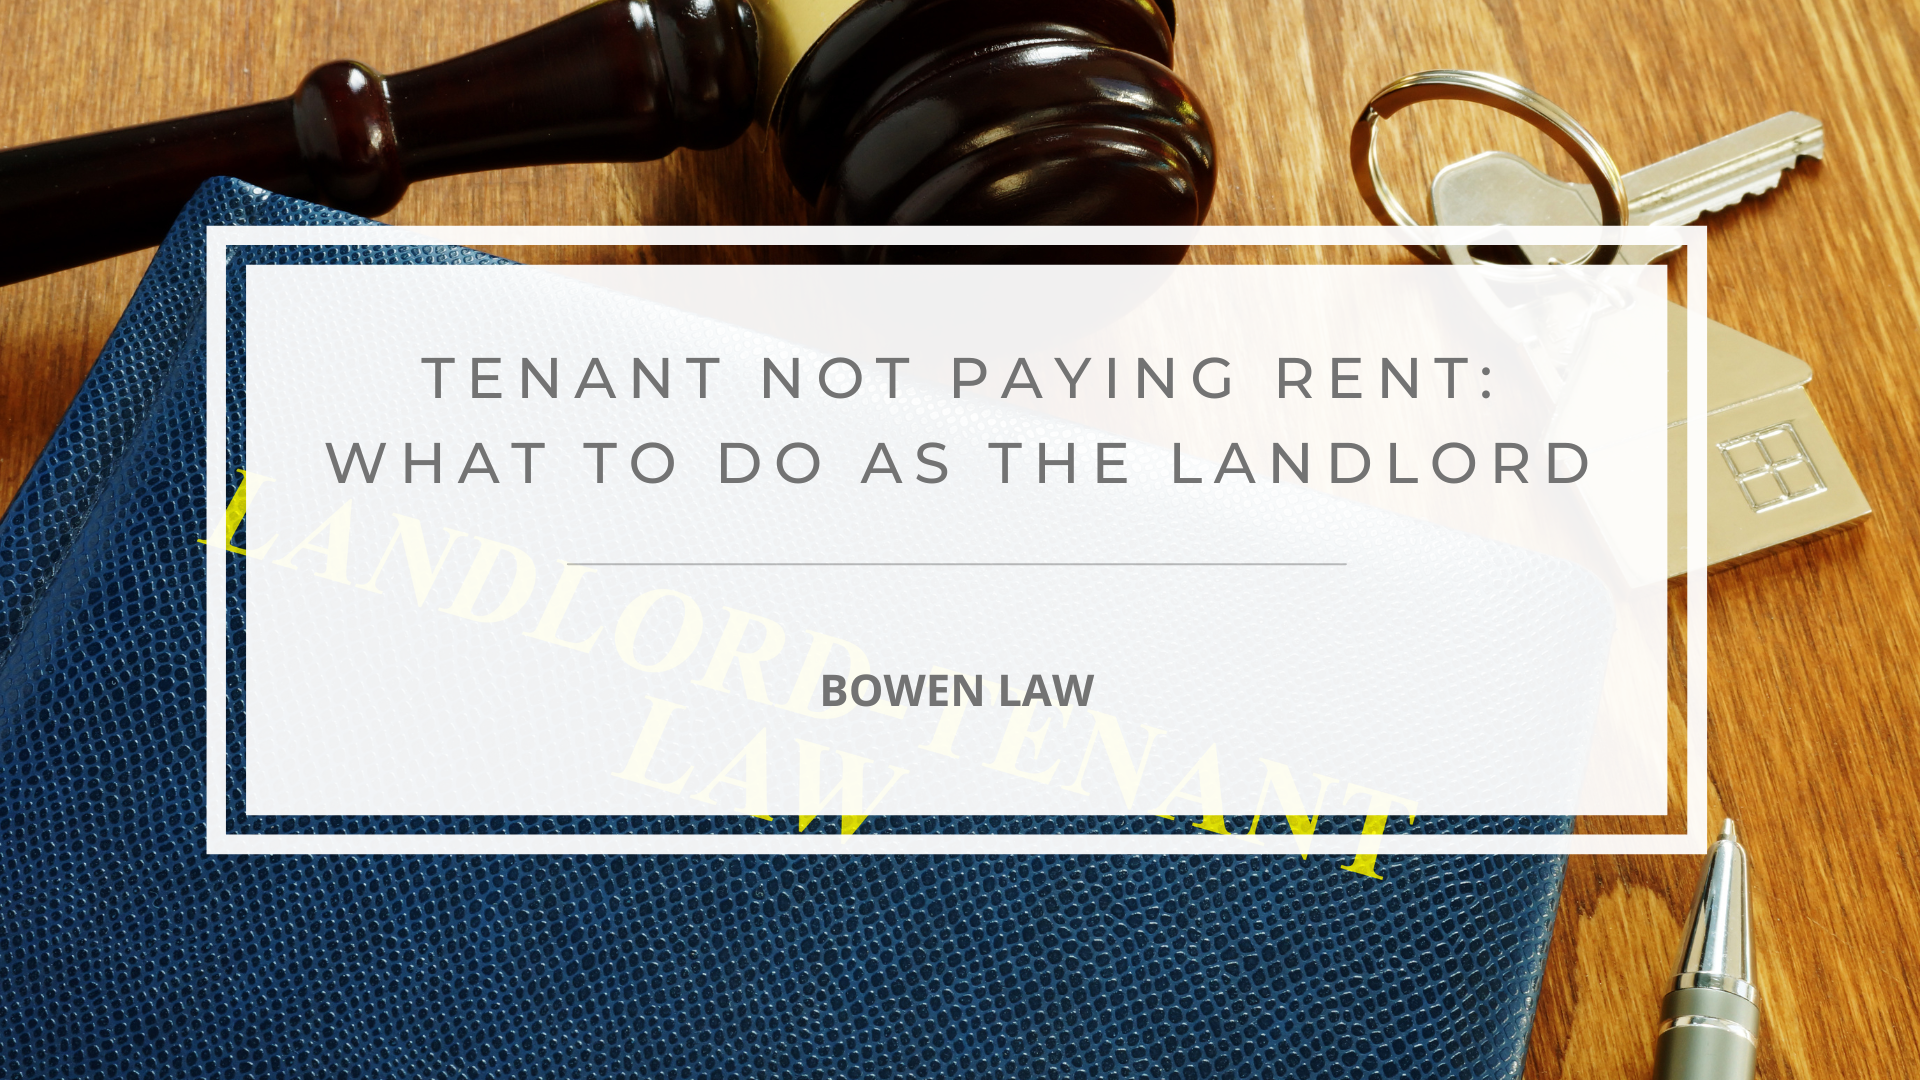 Featured image of tenant not paying rent: what to do as the landlord